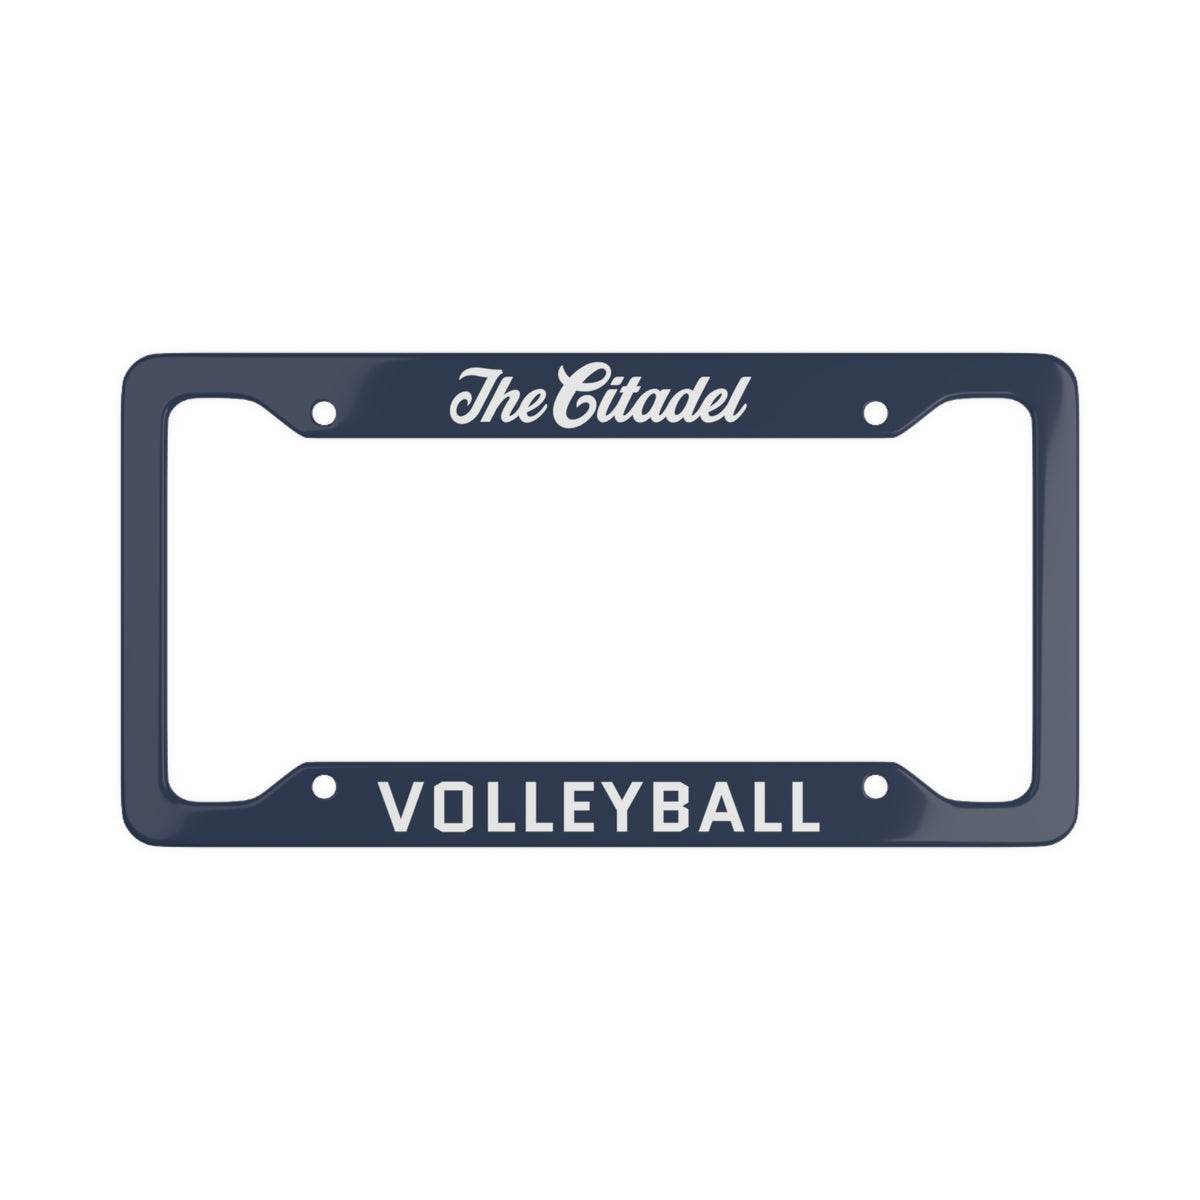 The Citadel, Volleyball License Plate Frame